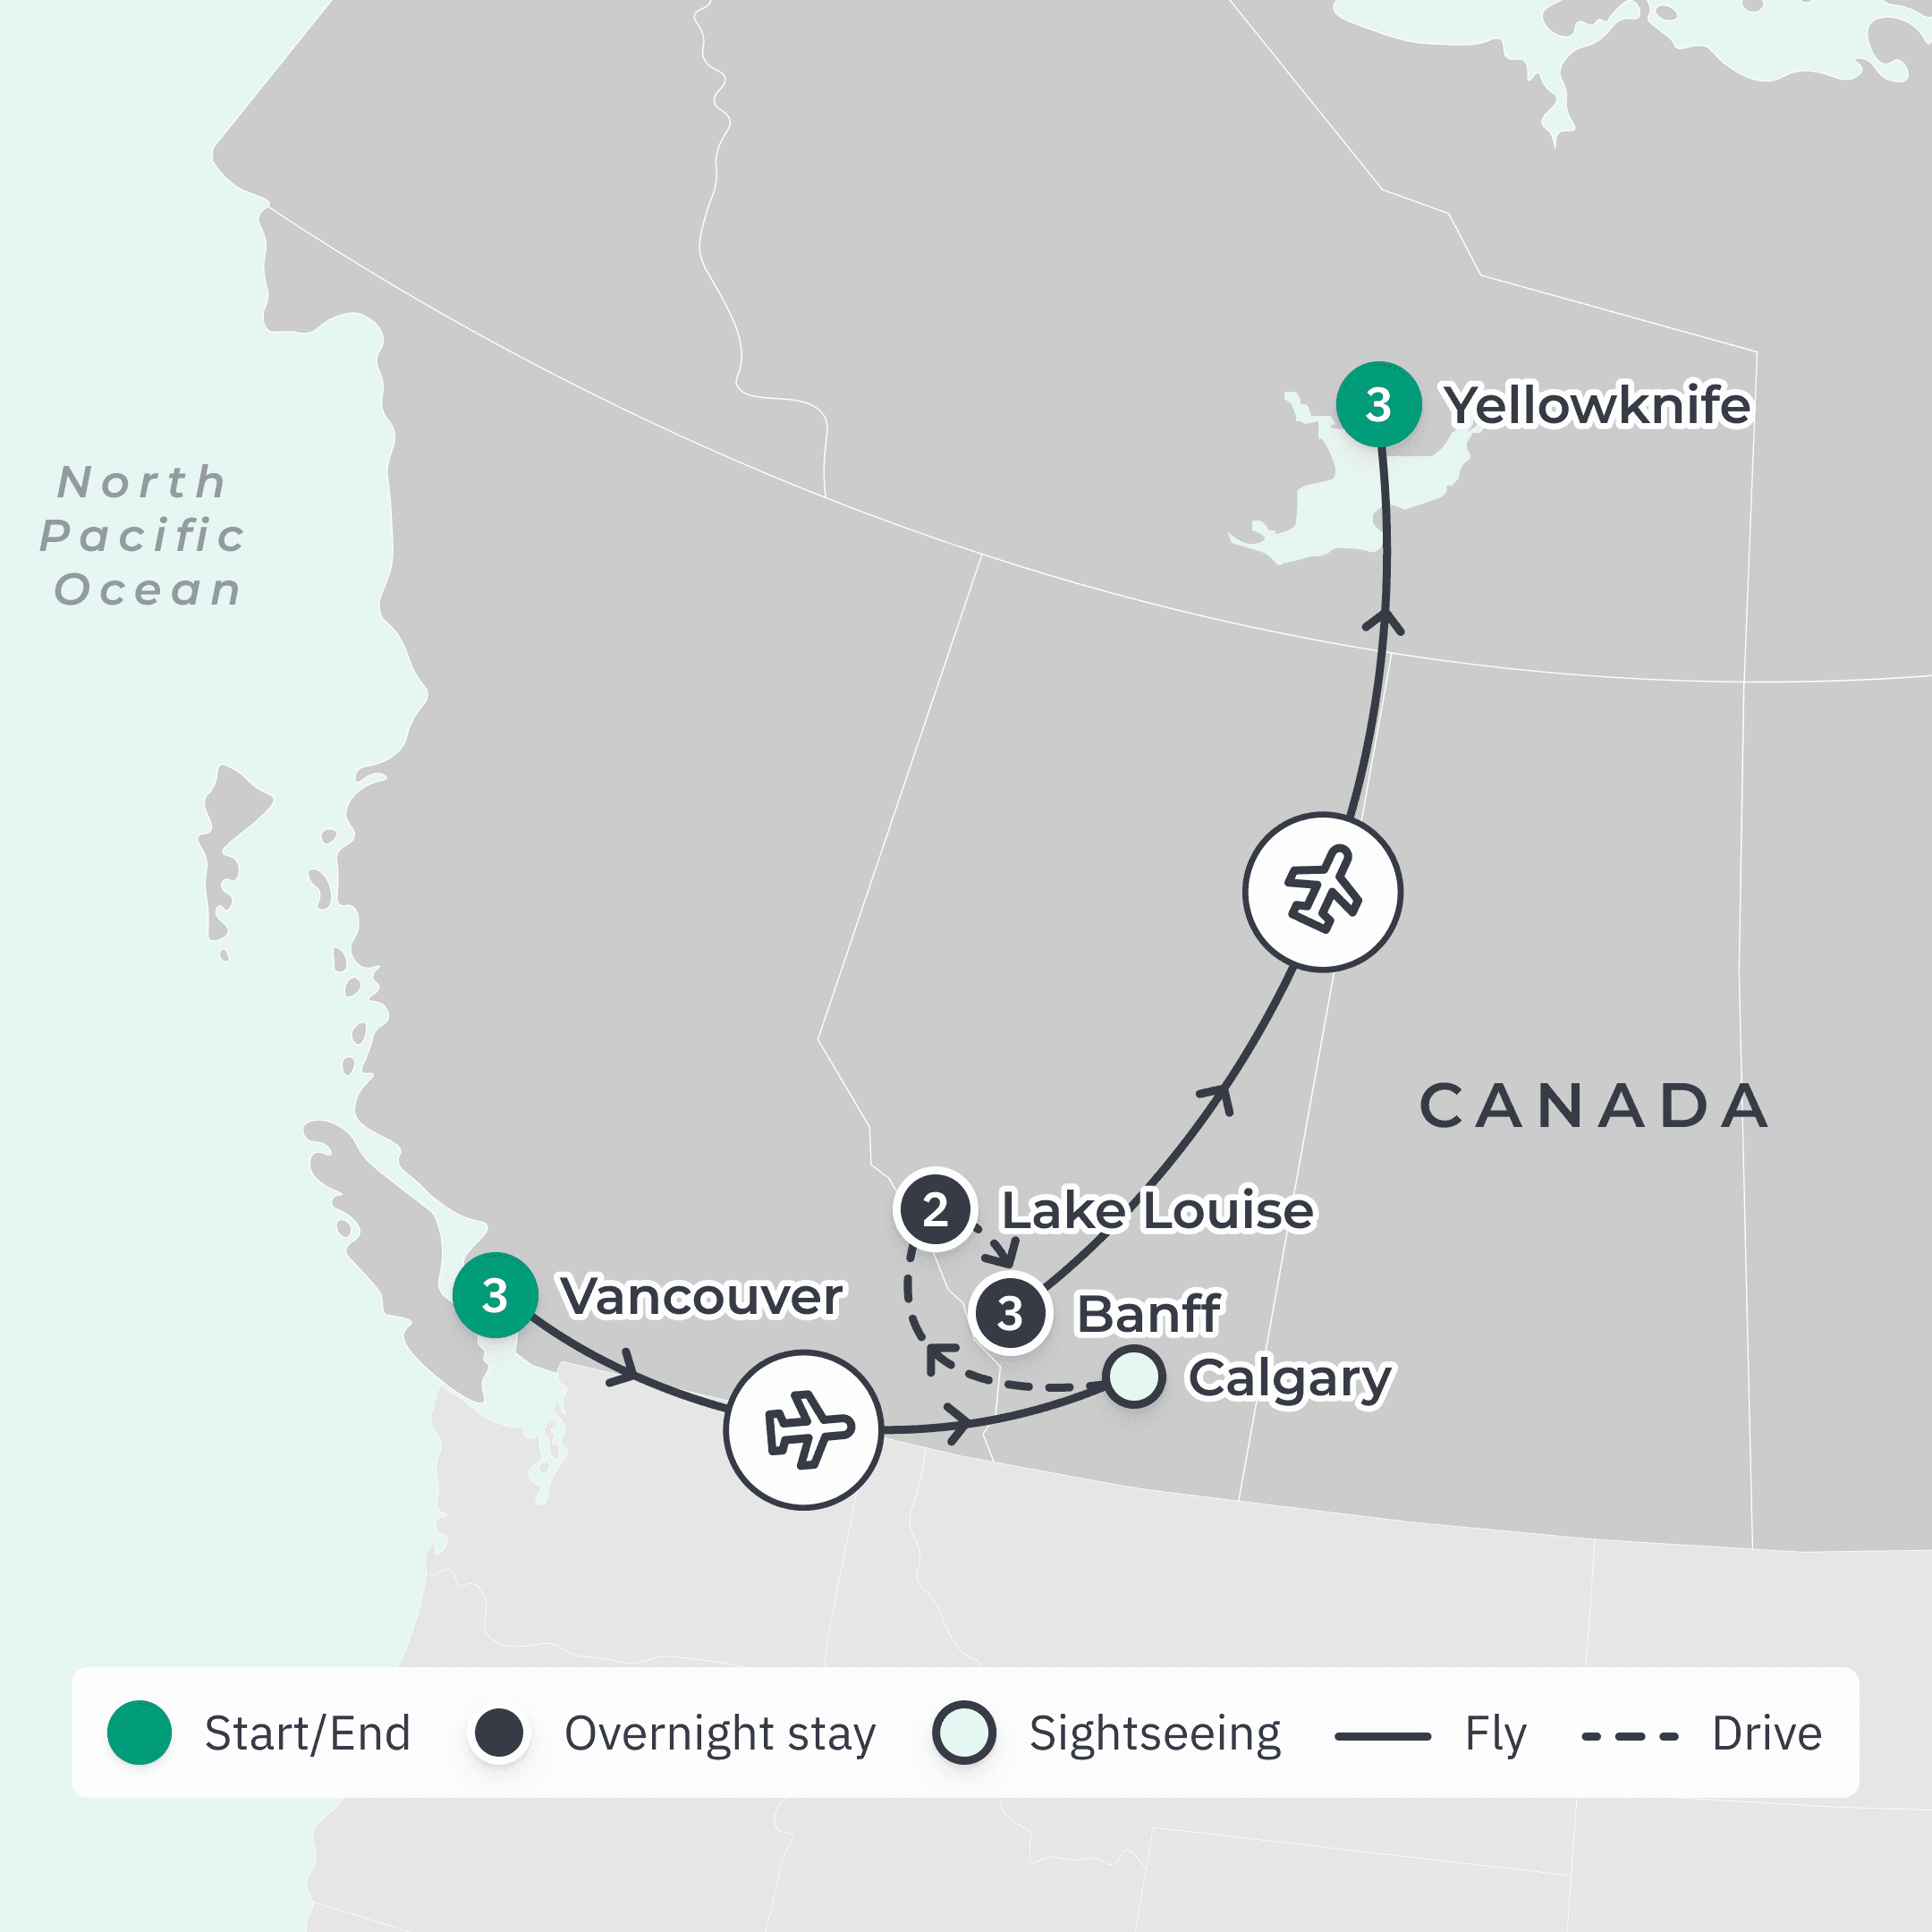 Best of Canada Winter Tour with Northern Lights Viewing & Rockies Helicopter Flight route map